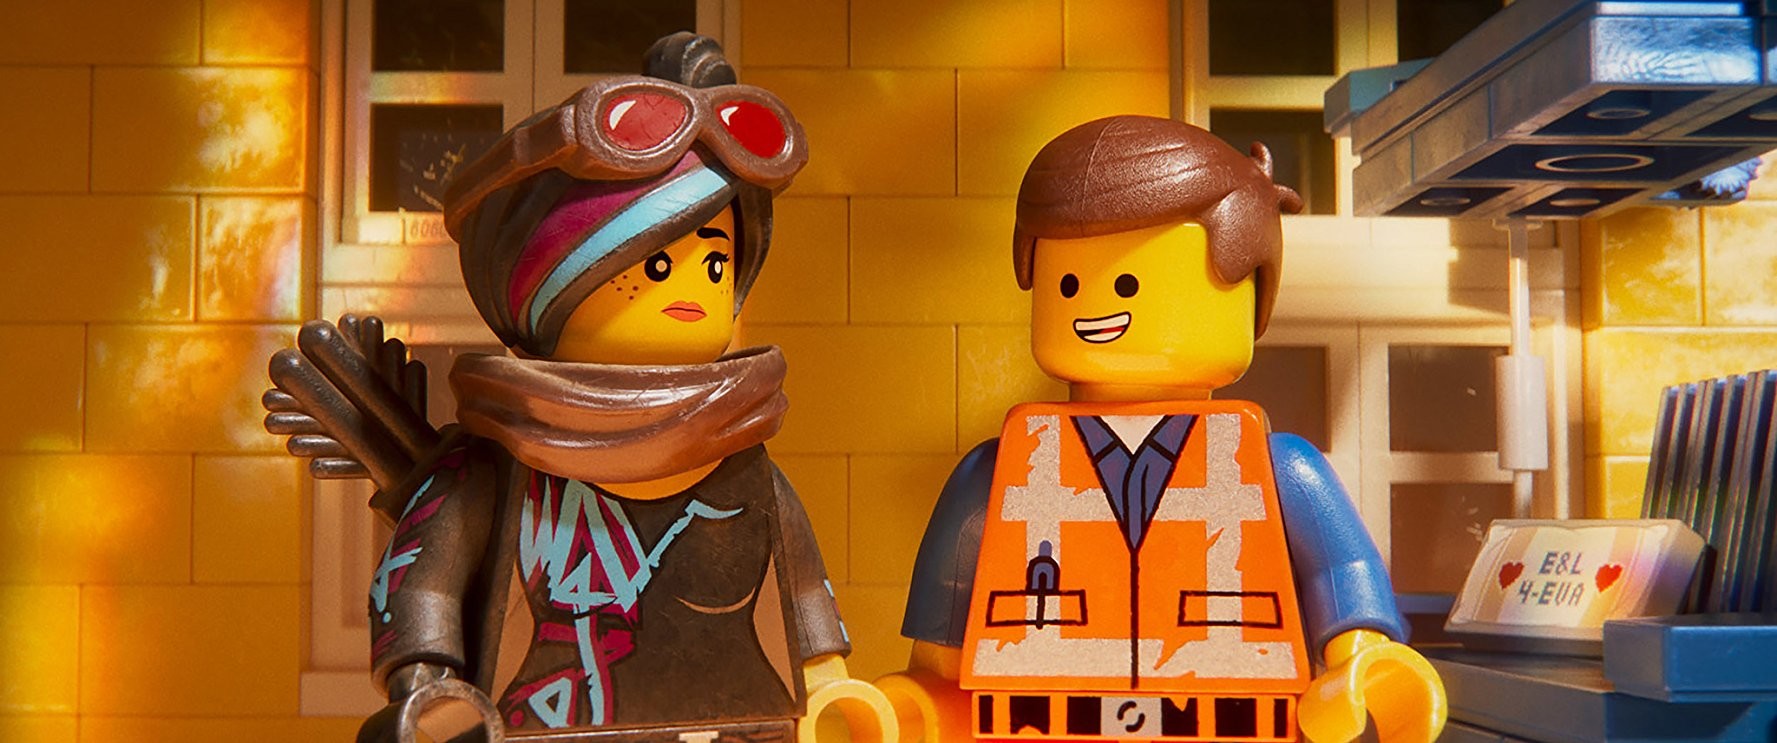 The LEGO Movie 2: The Second Part Reviews - Metacritic